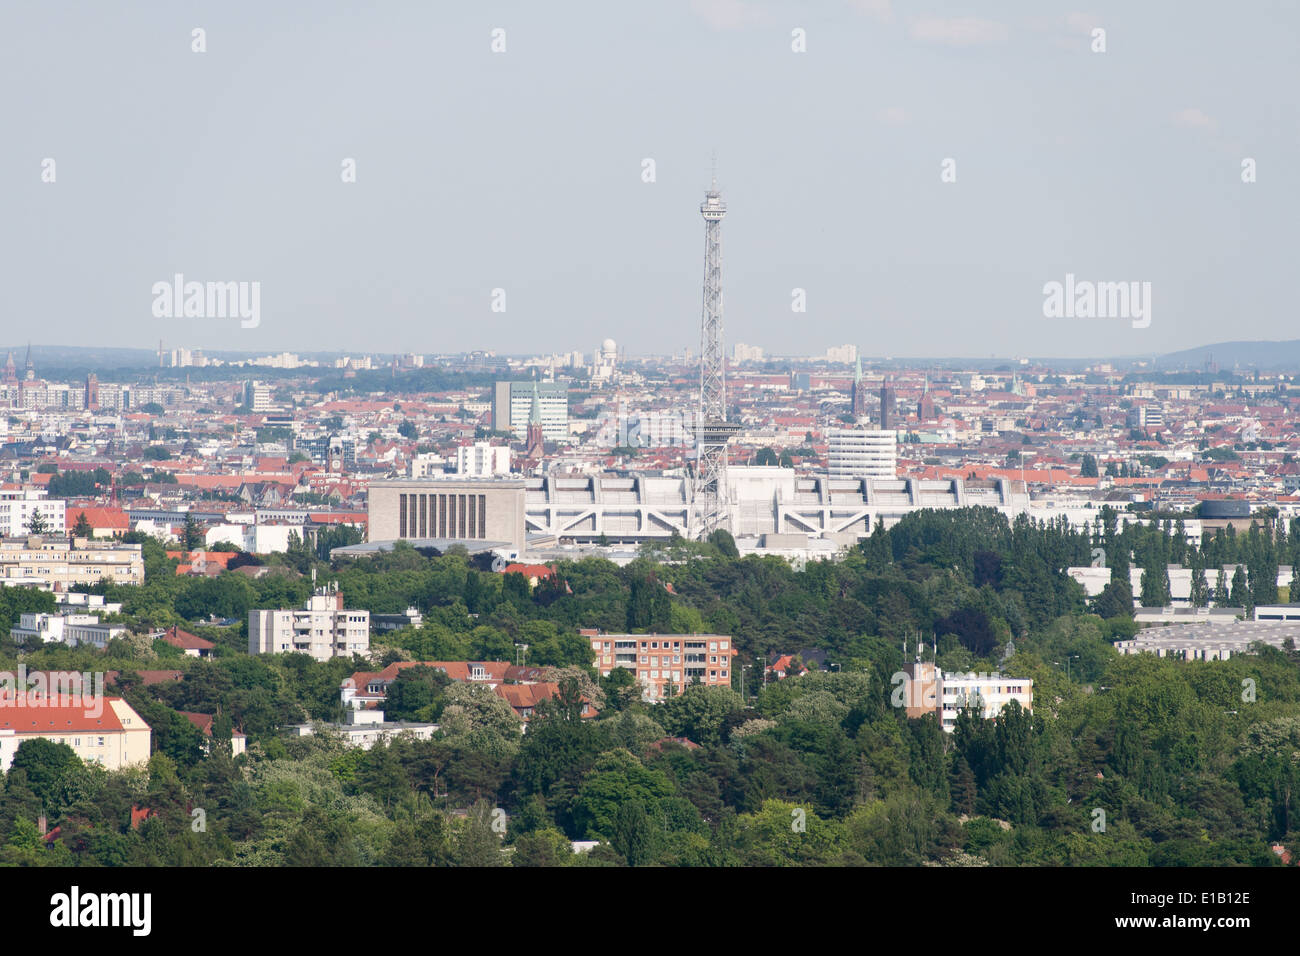 The view from the  glockenturm (bell tower) at the Olympic stadium, Berlin, Germany Stock Photo